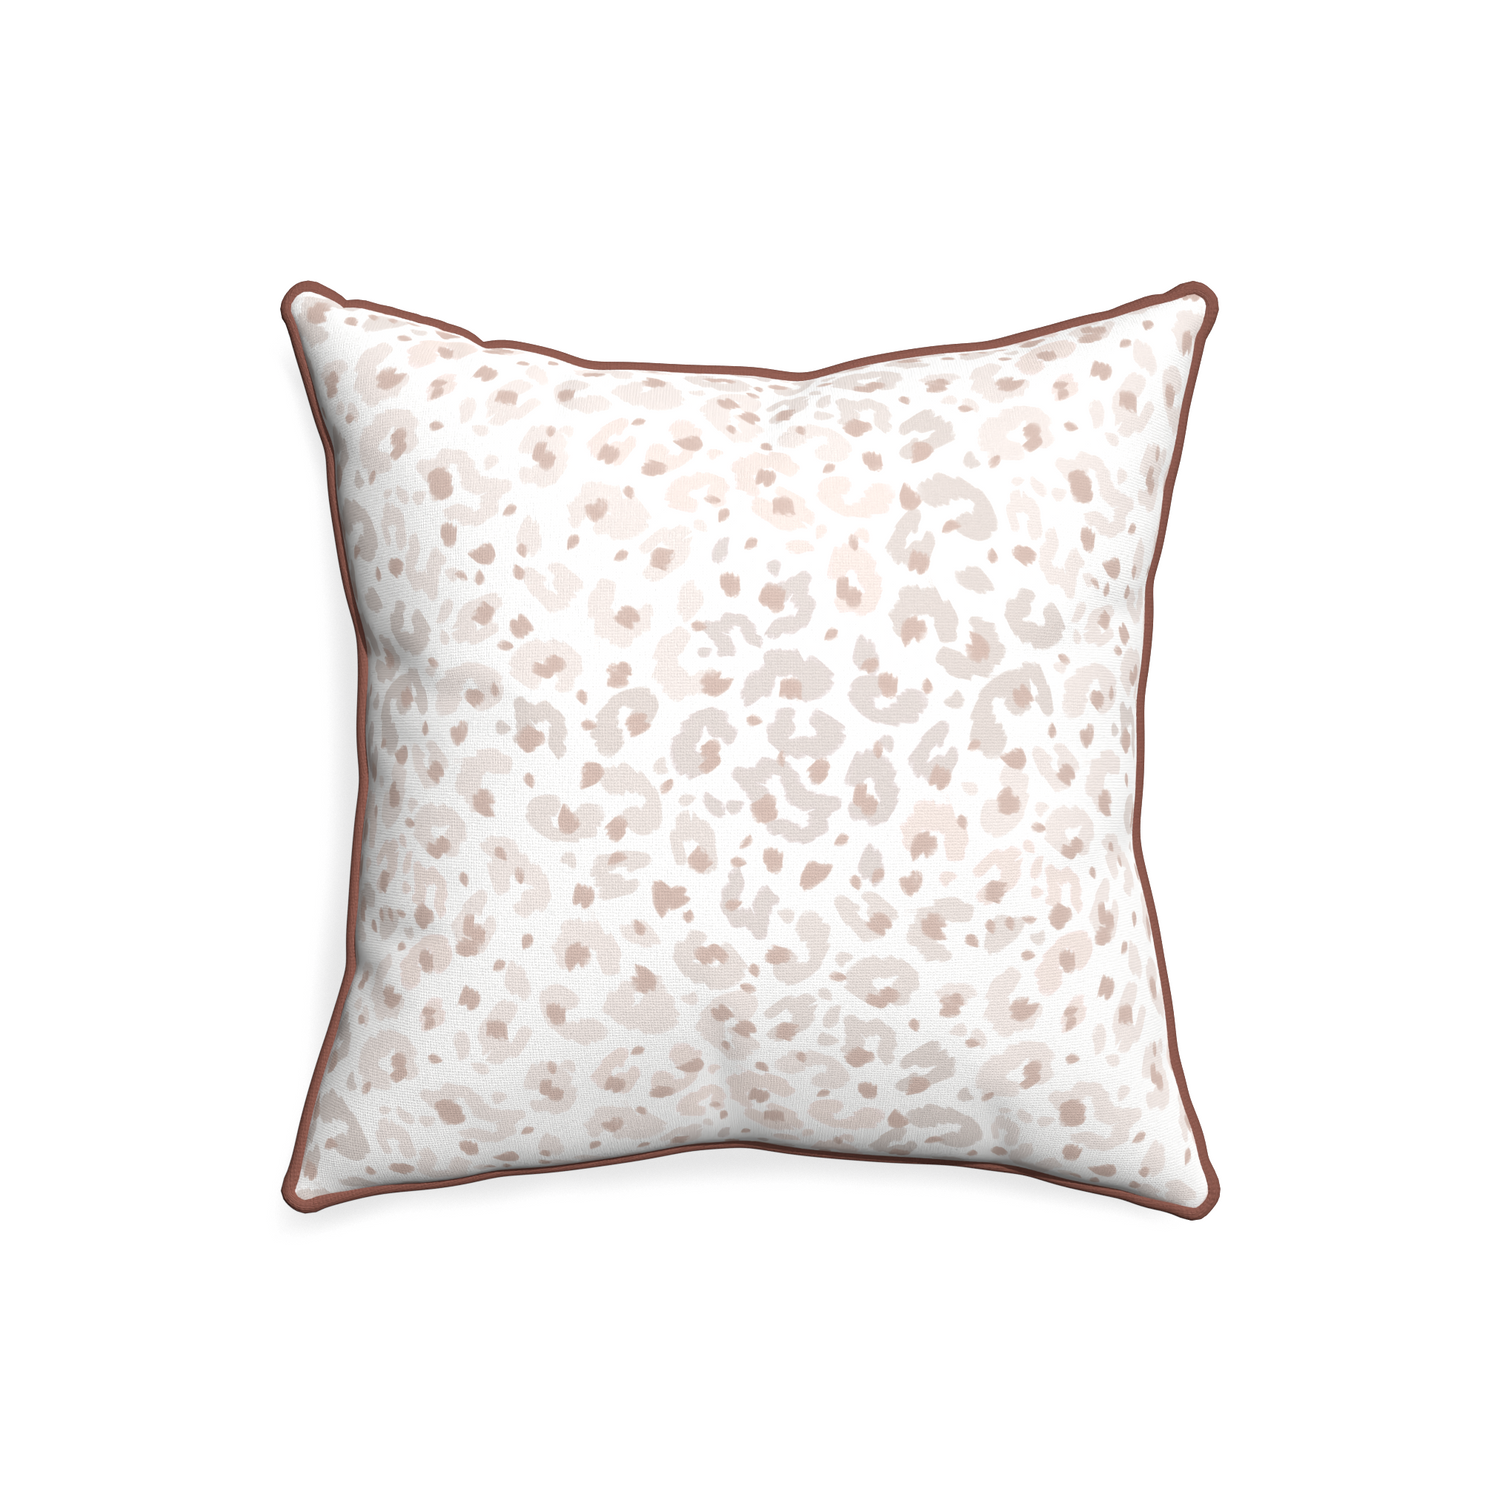 20-square rosie custom pillow with w piping on white background